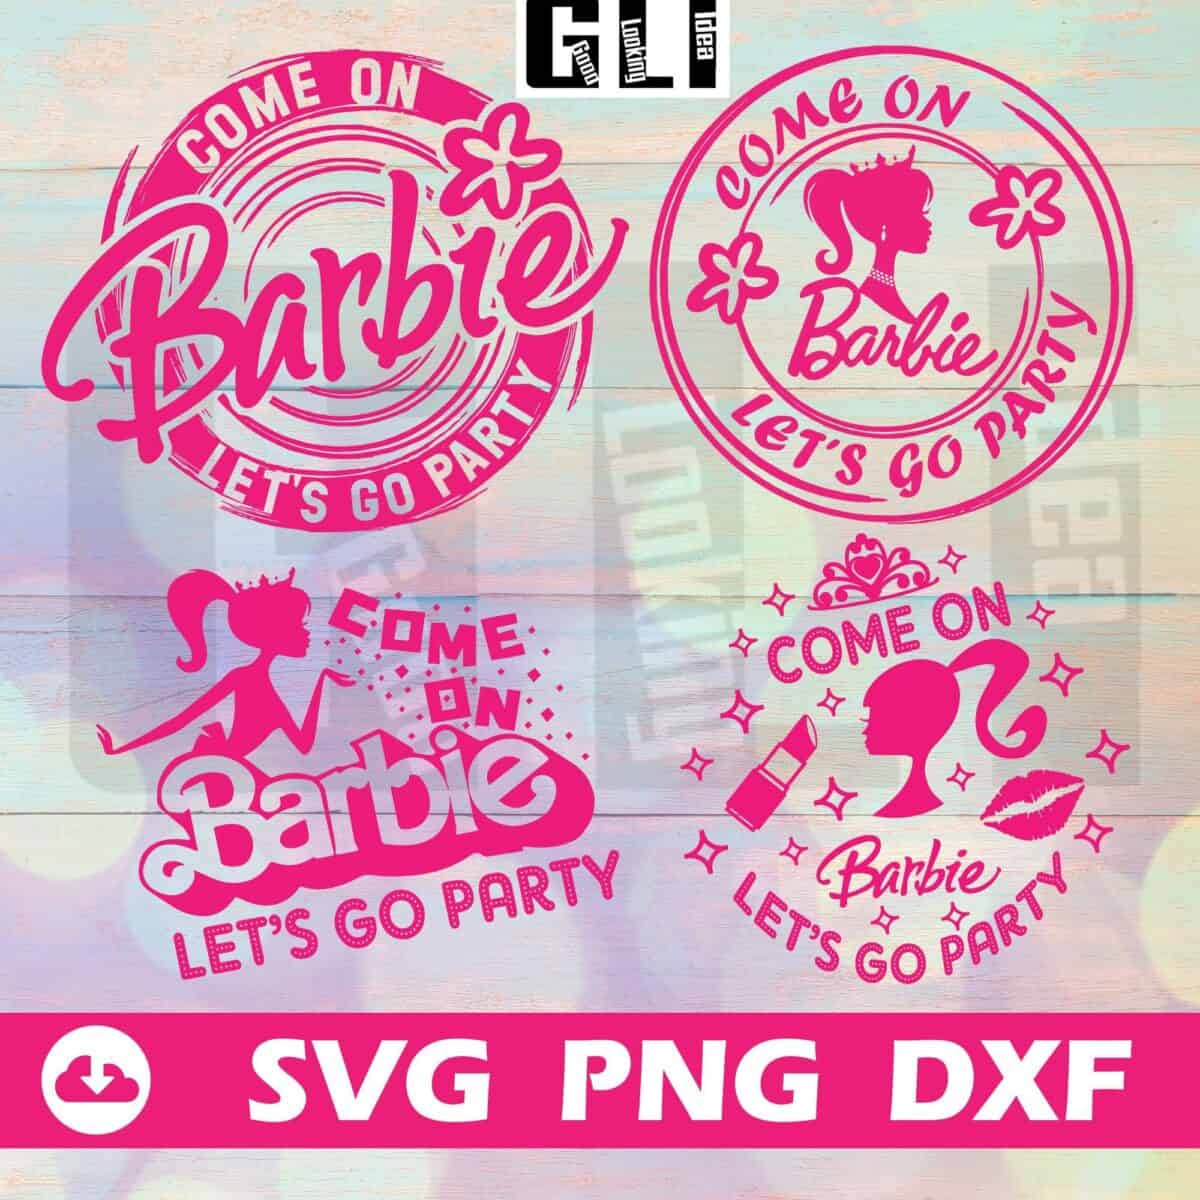 come on barbie lets go partybarbie bundle svgbarbie girl aaqj5